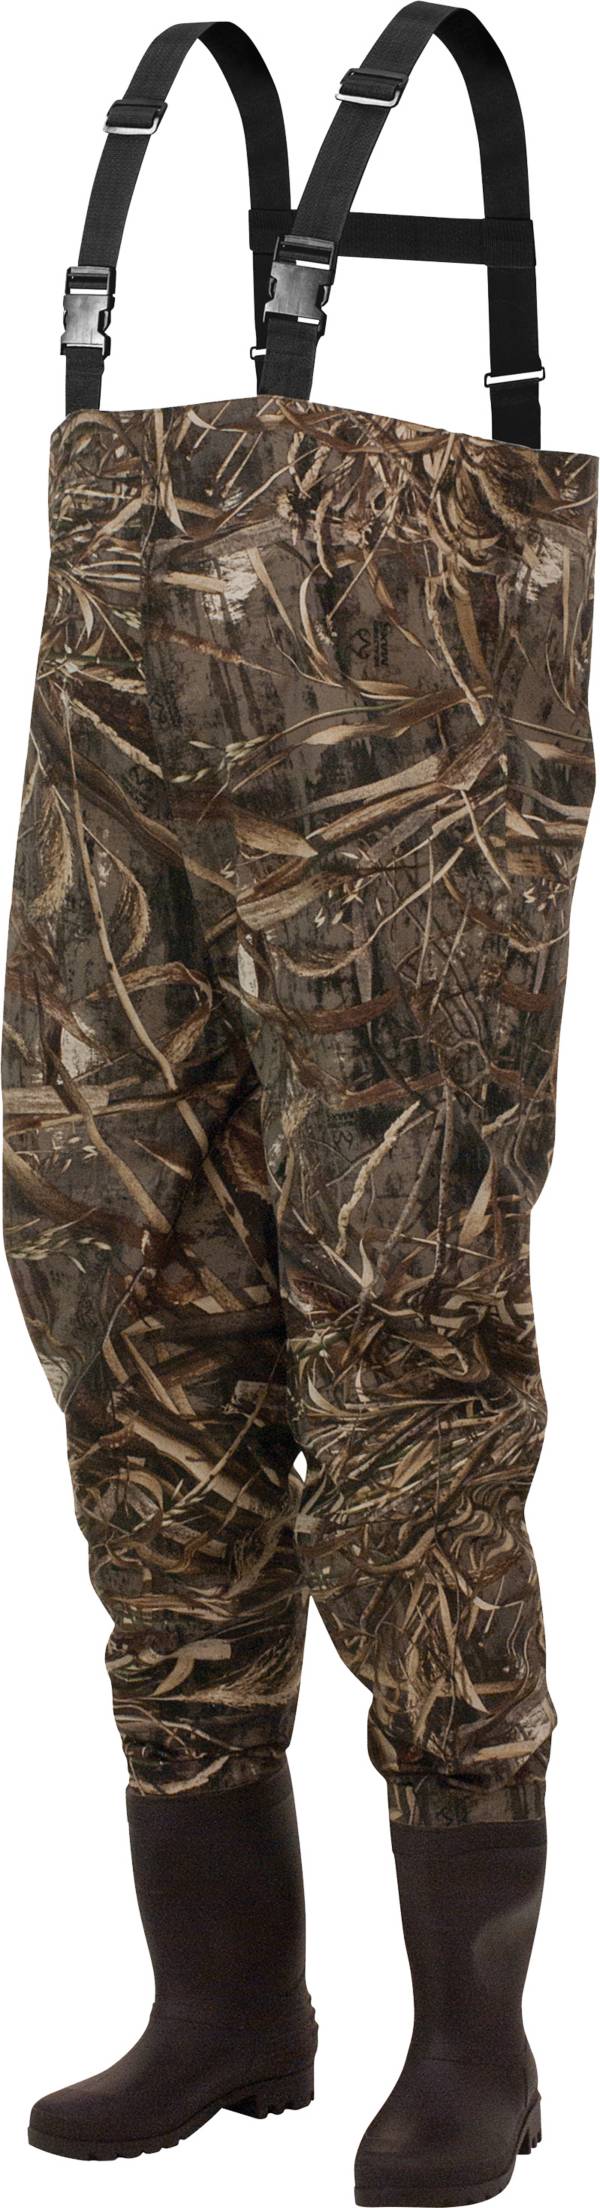 frogg toggs Rana II Camouflage Chest Waders product image